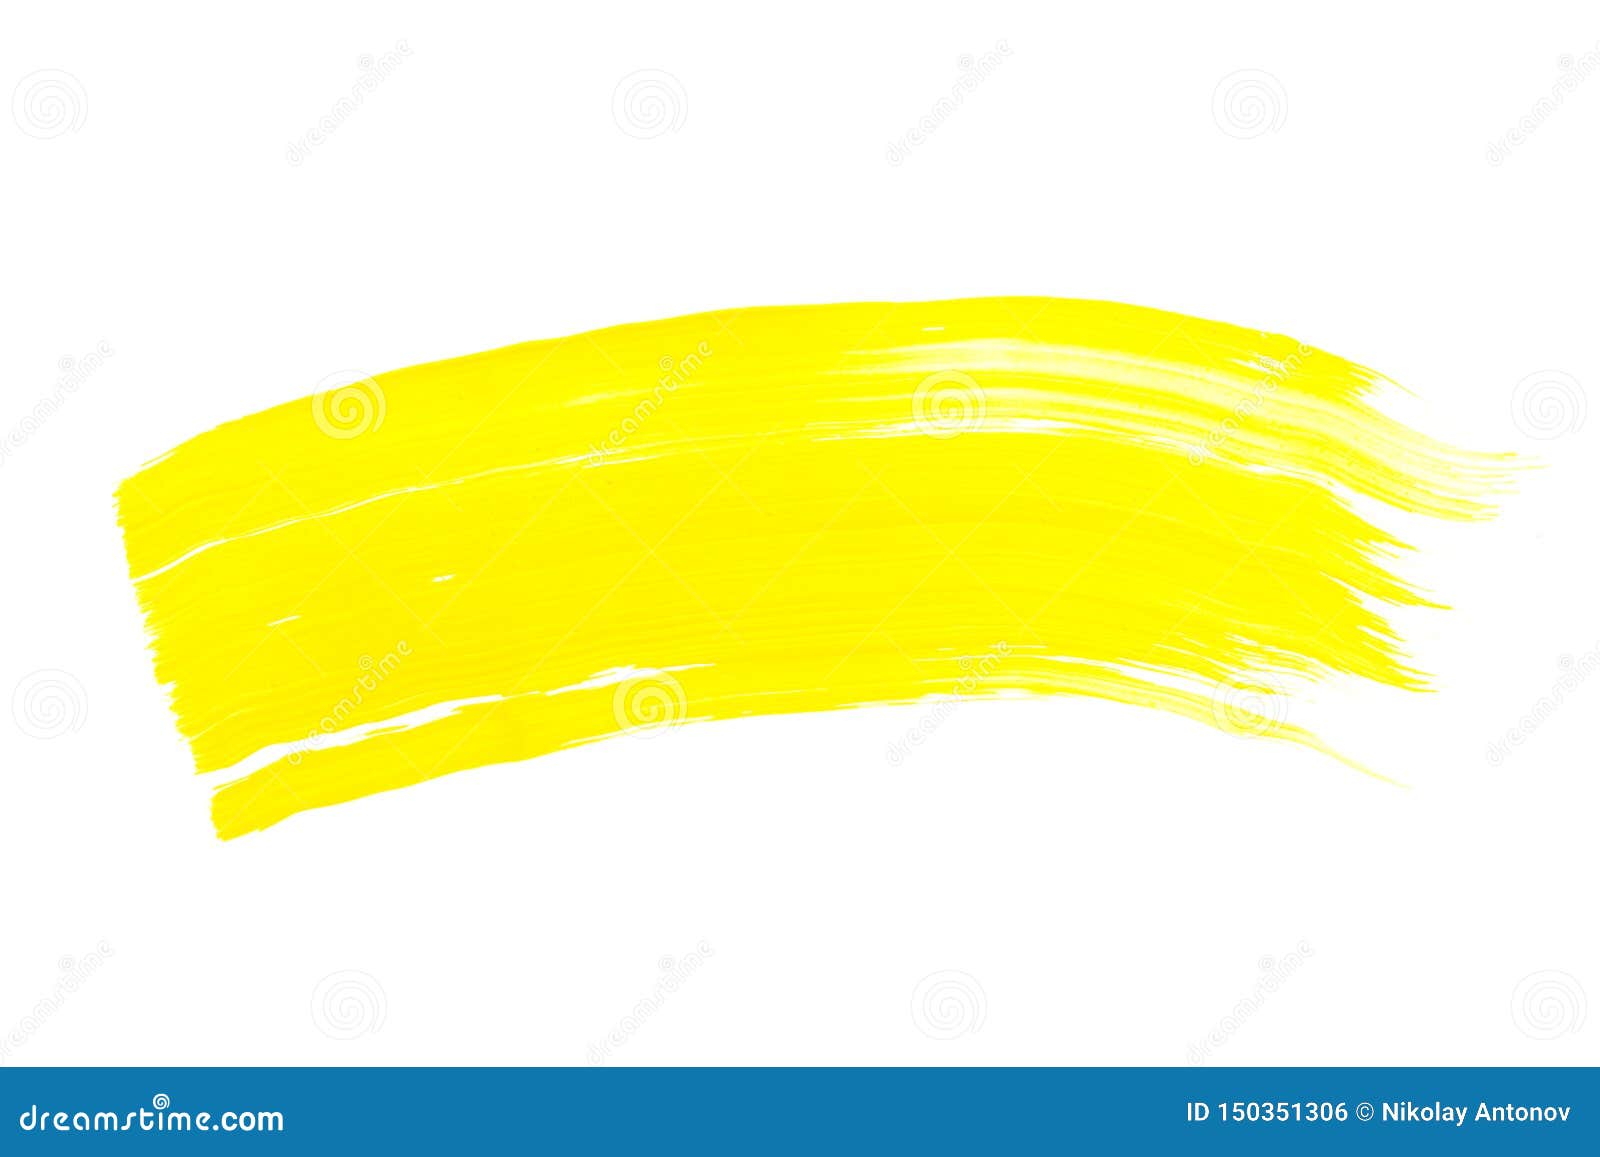 Yellow Brush Stroke Isolated on White Background. Yellow Abstract Stroke  Stock Photo - Image of creative, artistic: 150351306